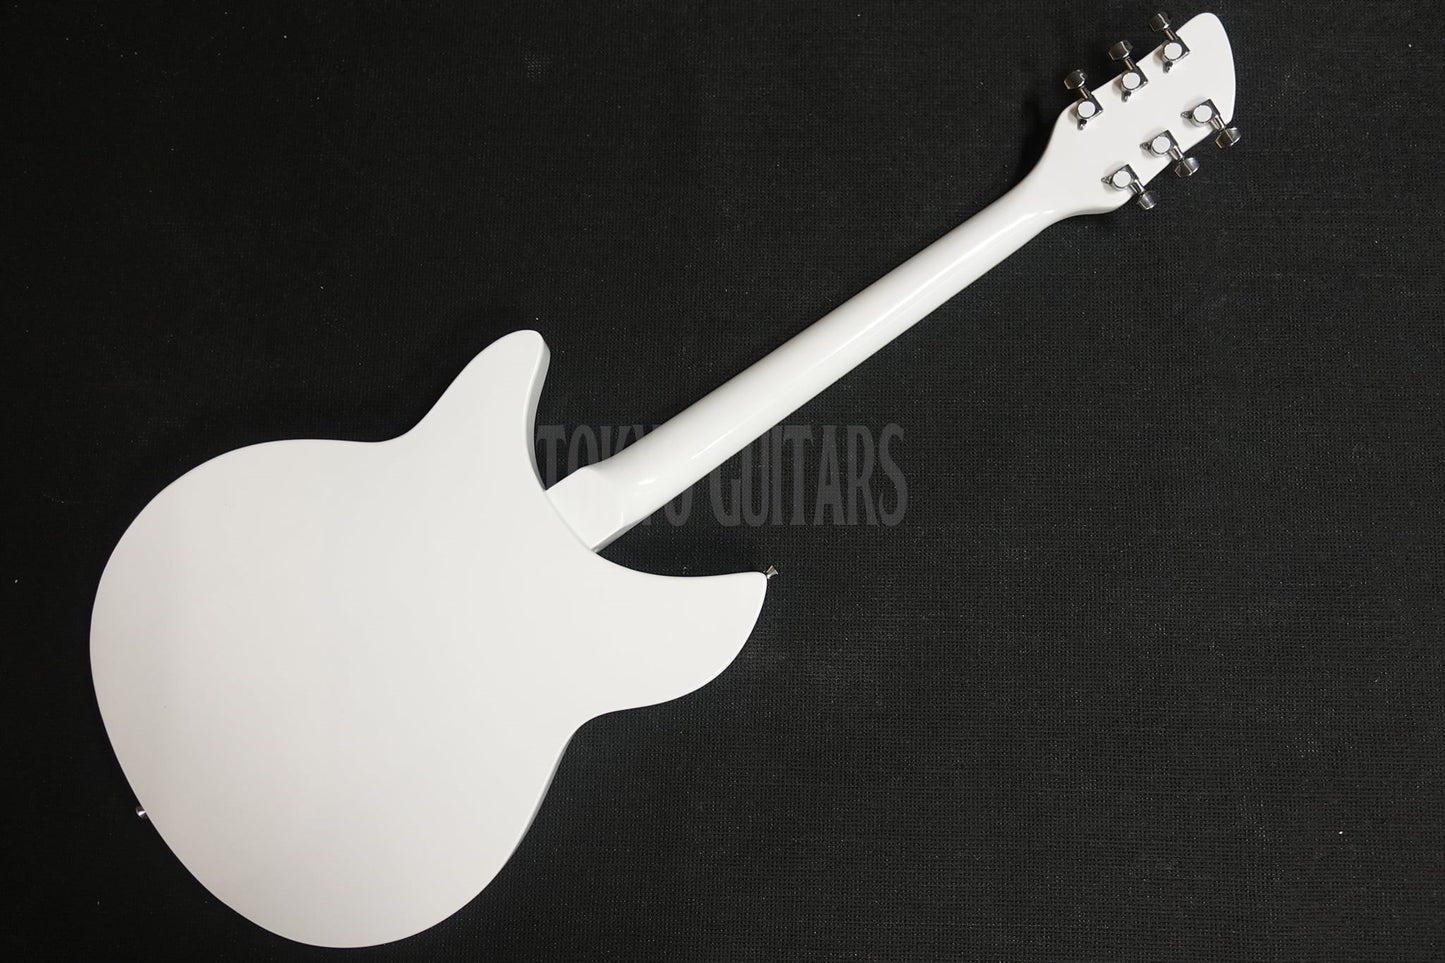 RB-5000 (Solid White)